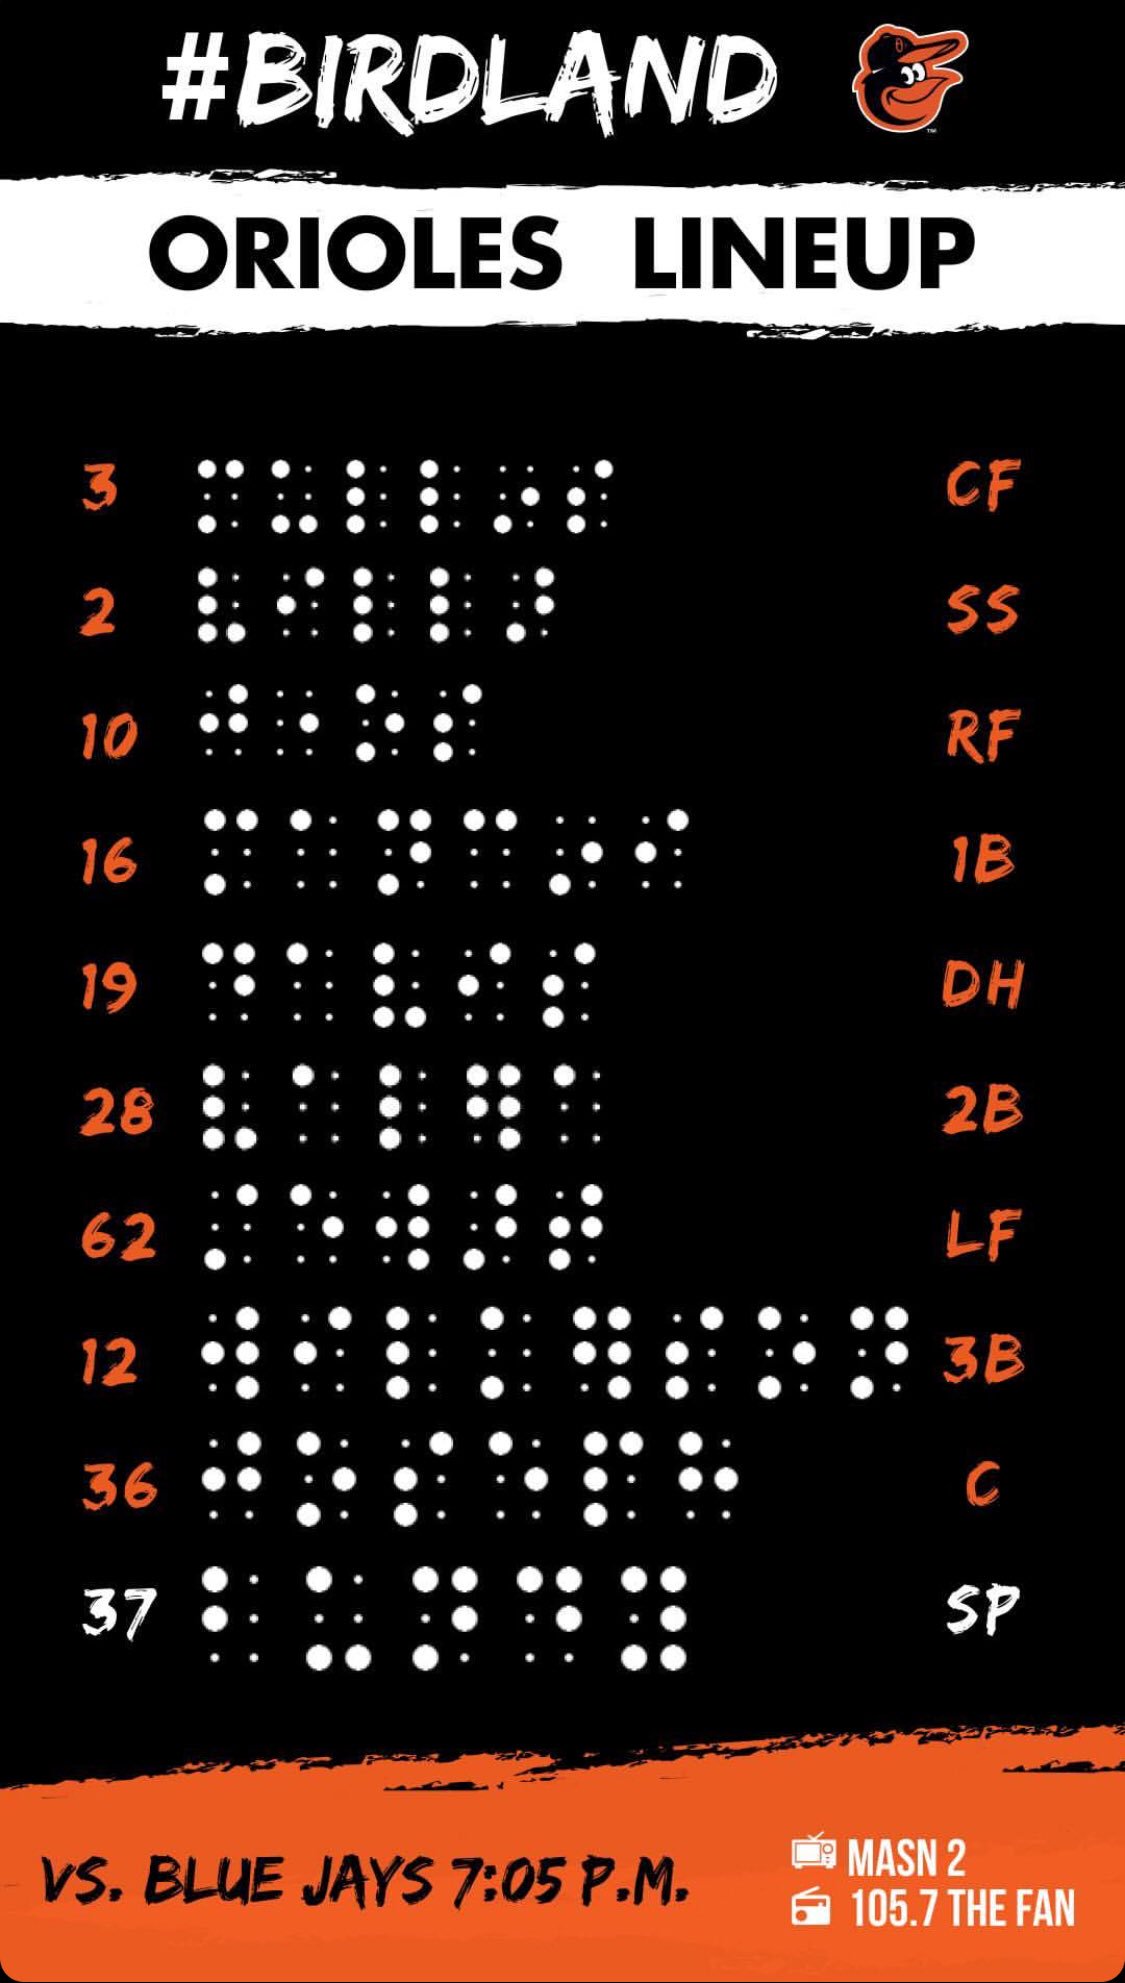 BUCKS COUNTY ASSOCIATION FOR THE BLIND AND VISUALLY IMPAIRED - The  Baltimore Orioles became the first American pro team to wear jerseys with  Braille lettering. Last night was National Federation of the